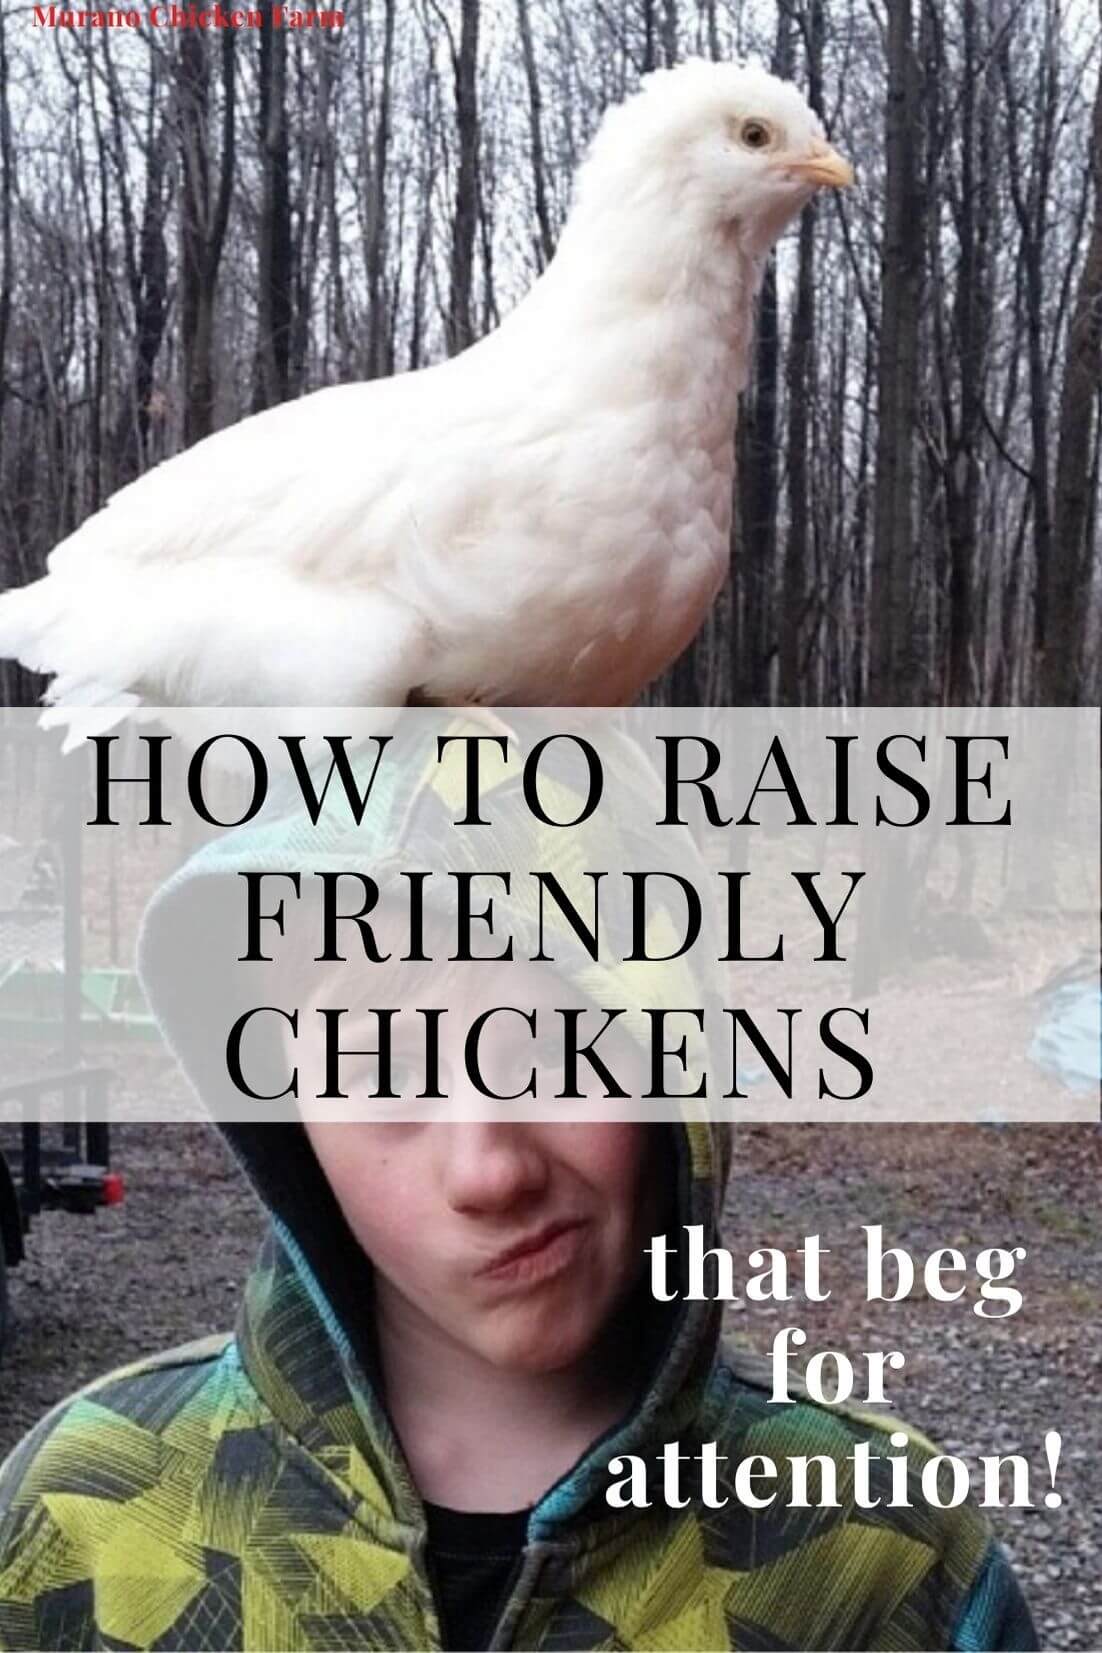 How to raise tame chickens